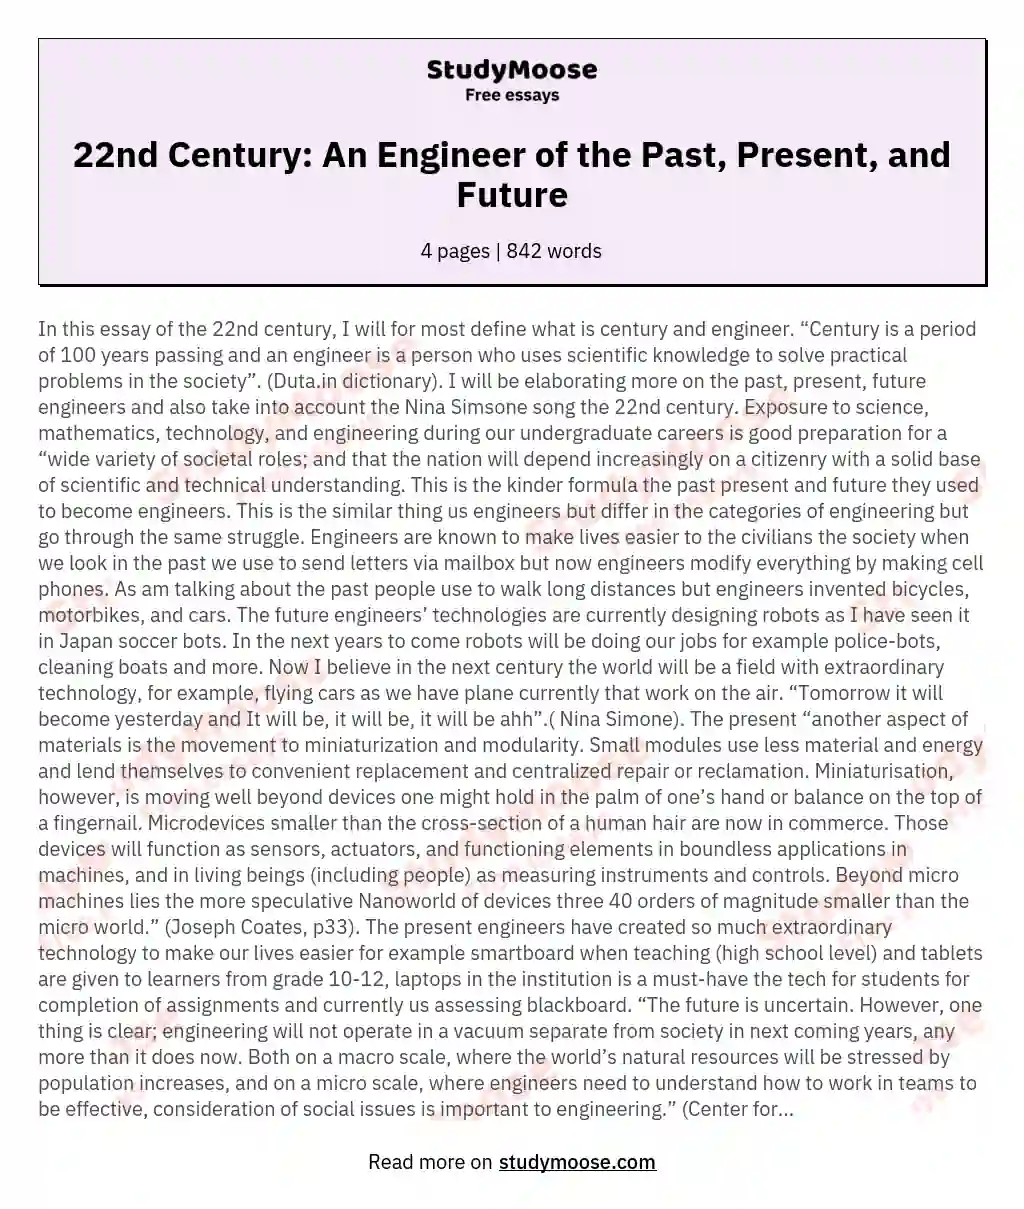 22nd Century: An Engineer of the Past, Present, and Future essay